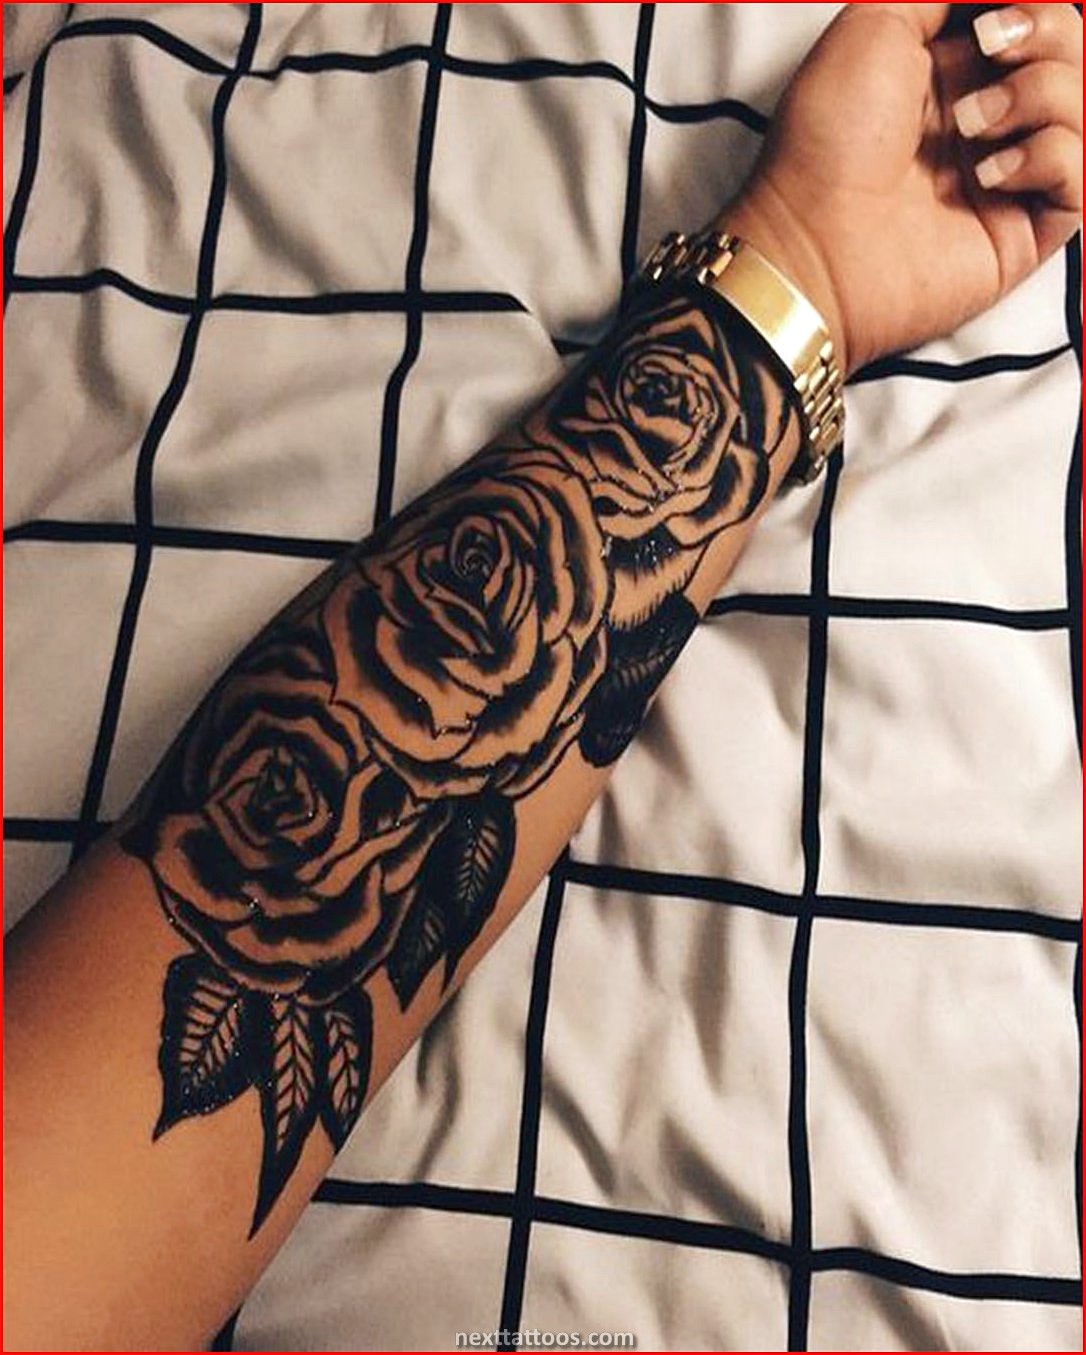 Female Forearm Tattoos Pictures